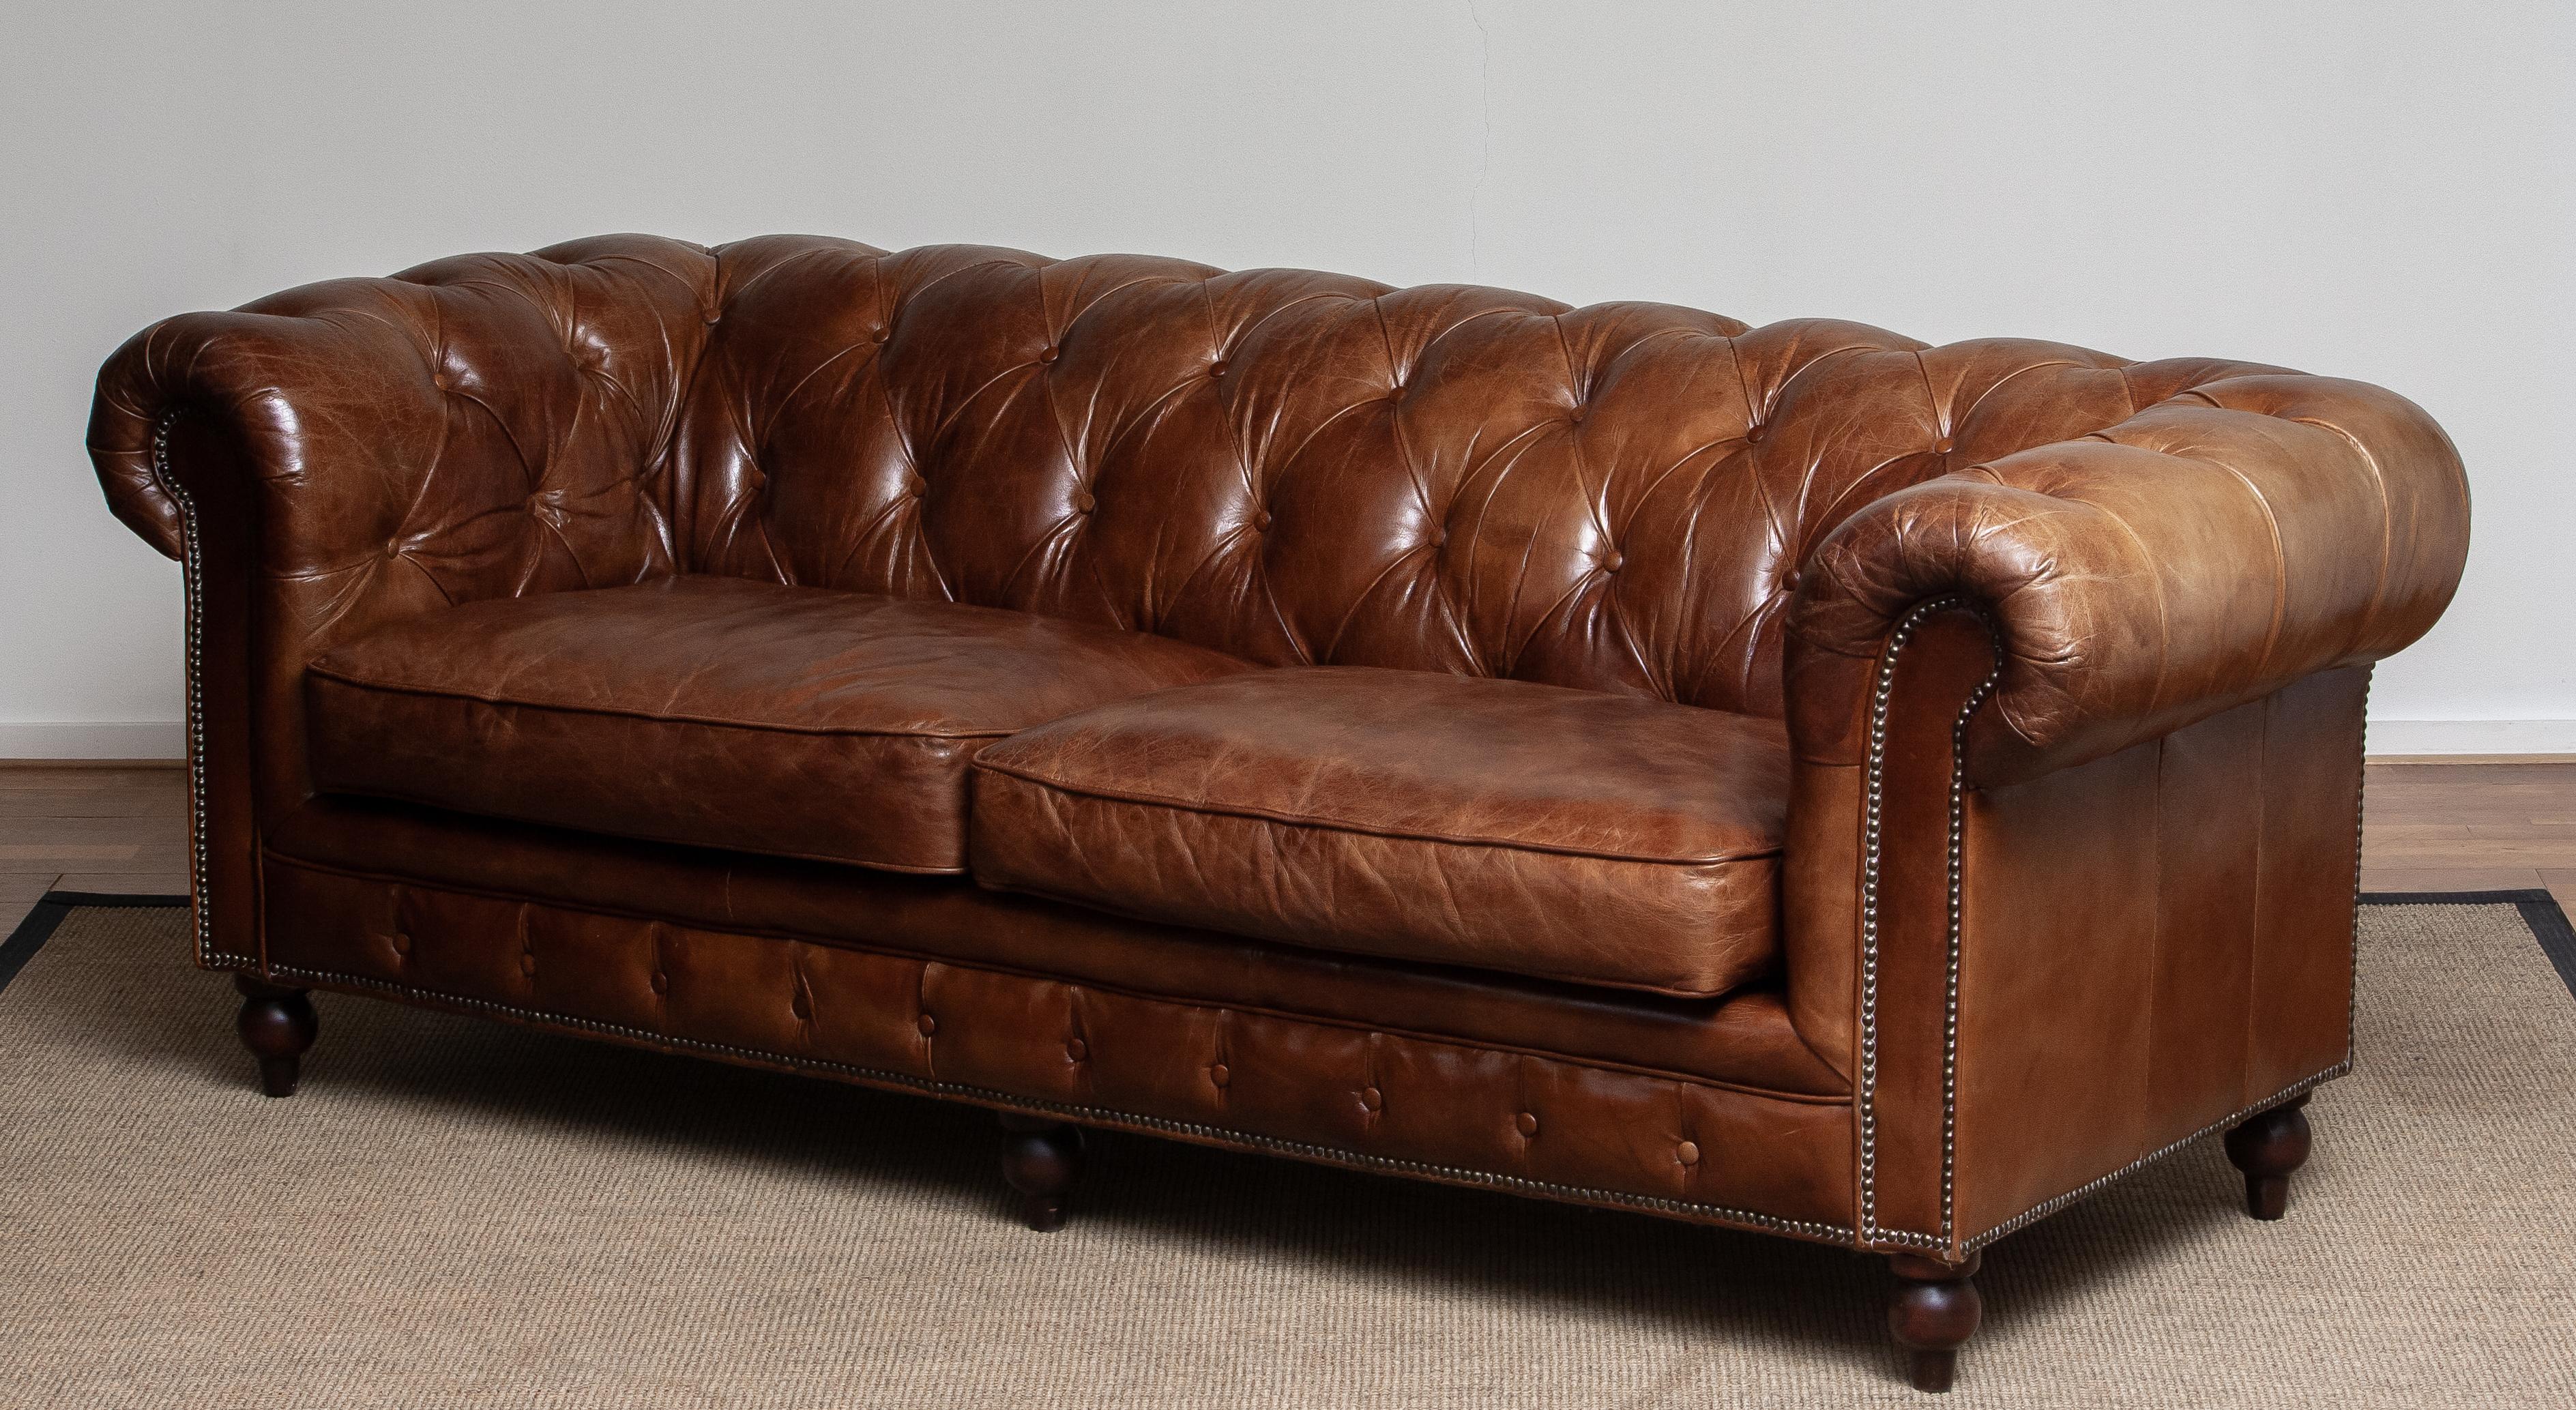 Tufted Brown Leather Chesterfield Sofa and Arm / Lounge Chair 13